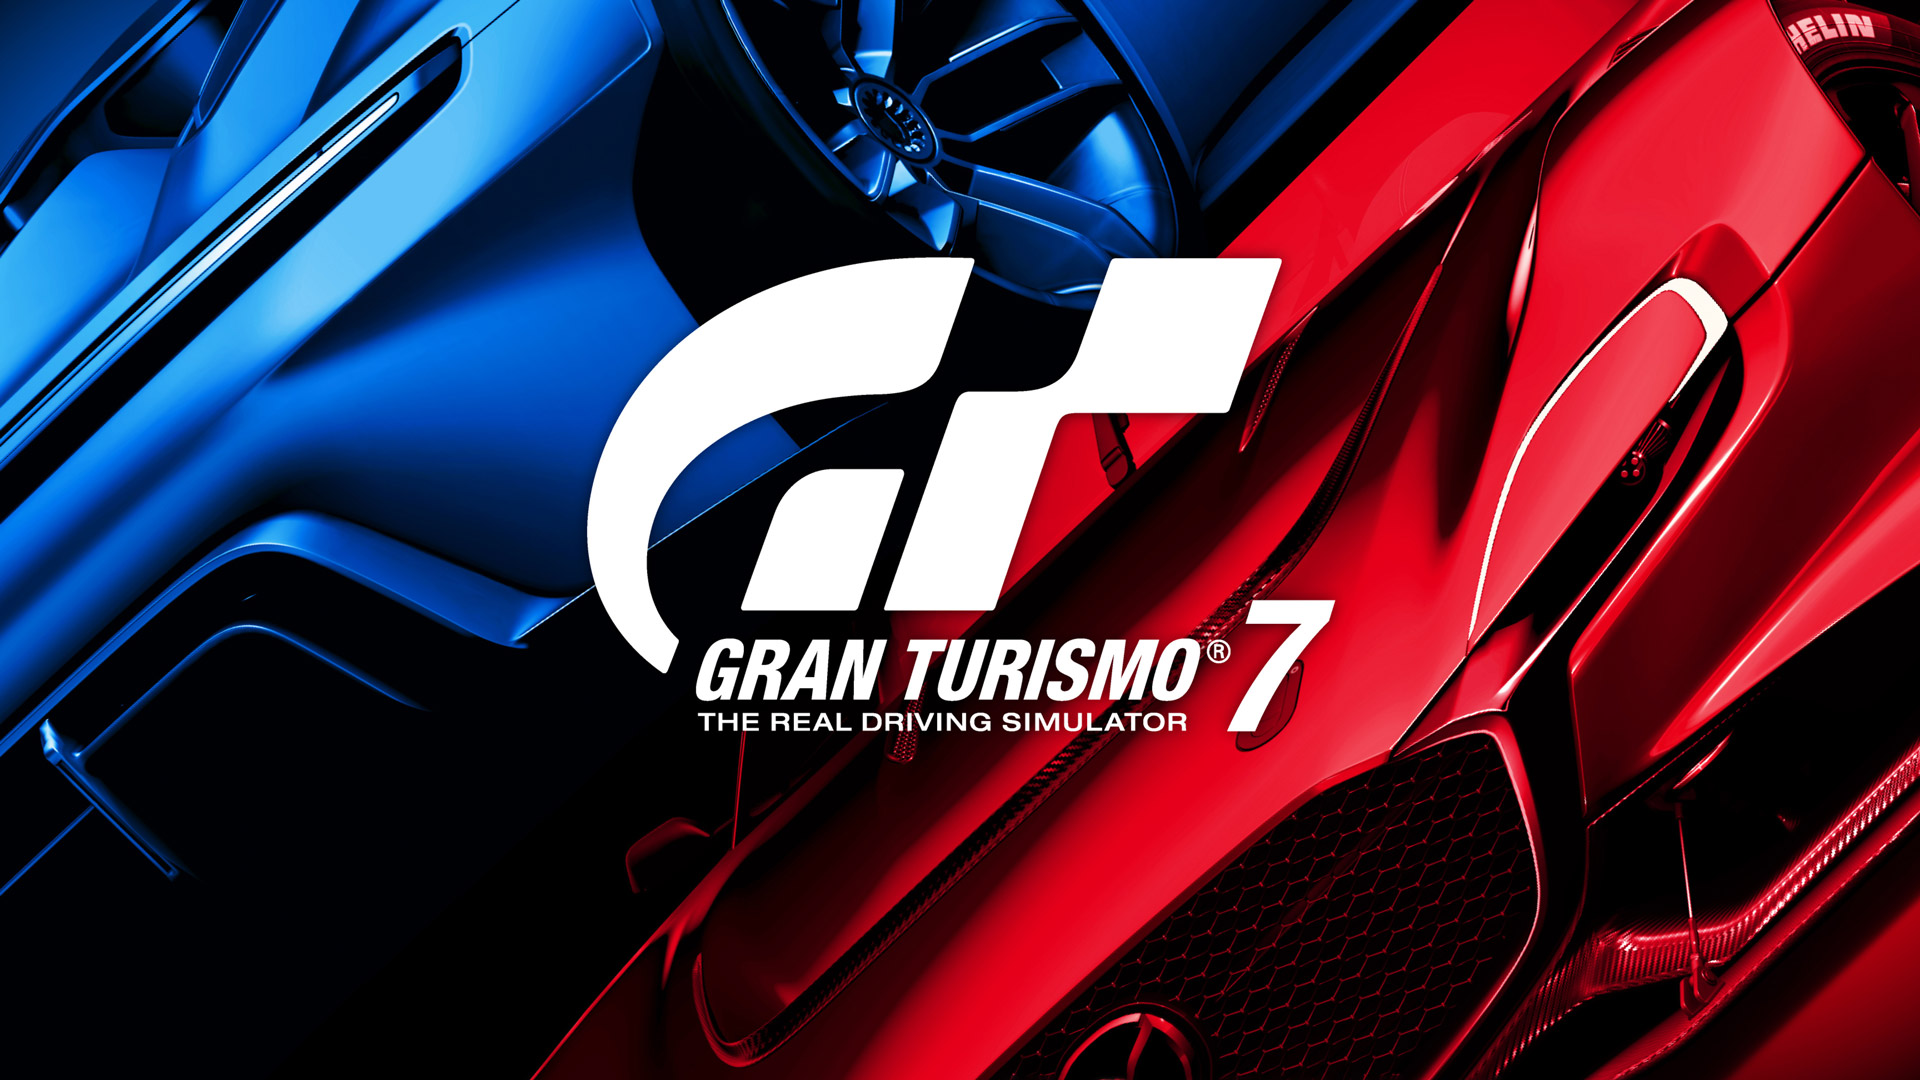 Gran Turismo 7 Coming to PSVR2 With Free VR Upgrade